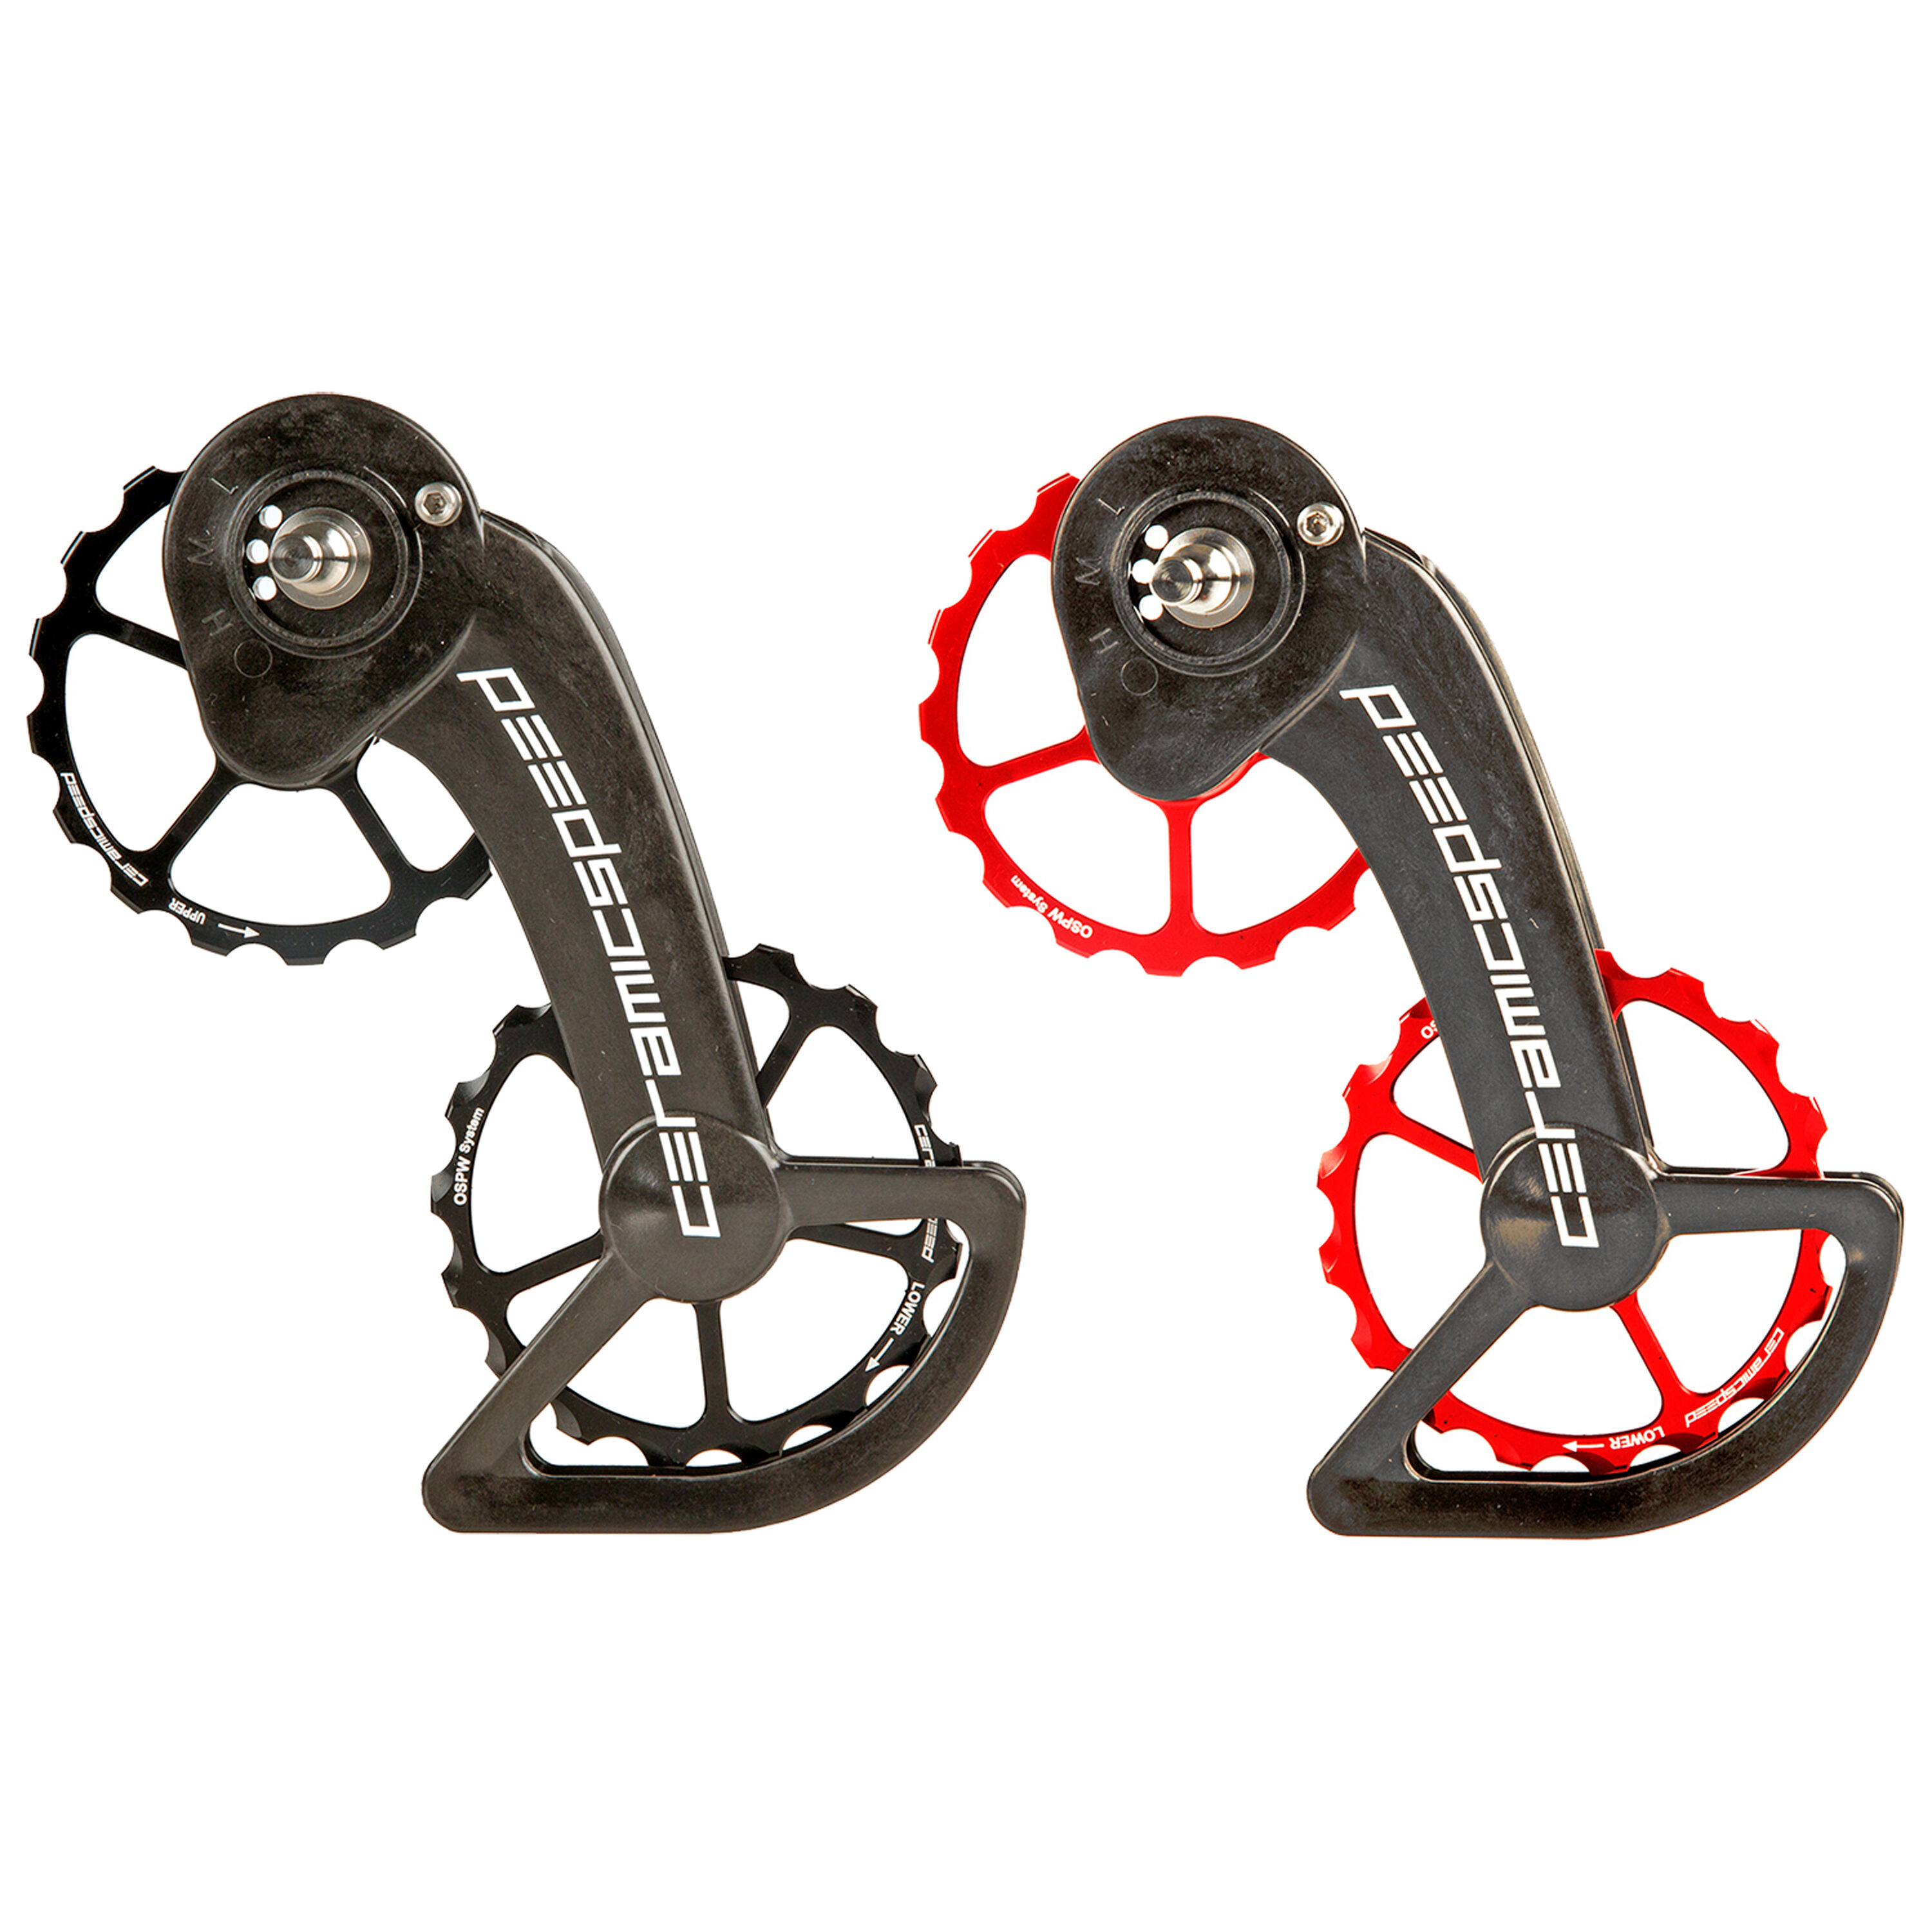 CeramicSpeed OSPW Sram Red eTap Oversized rear derailleur cage and pulley